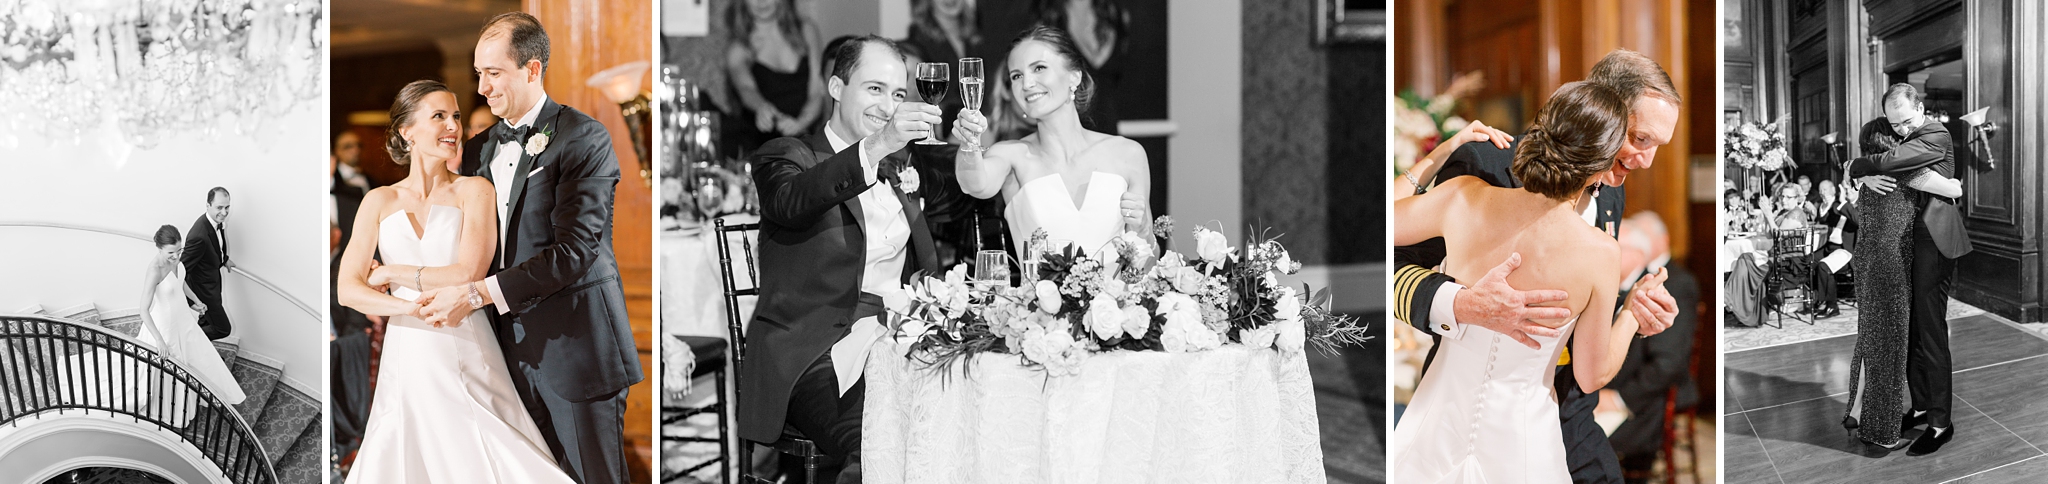 Receptions are FULL of fun events and this Washington, DC wedding photographer is sharing her tips on how to keep the night flowing!